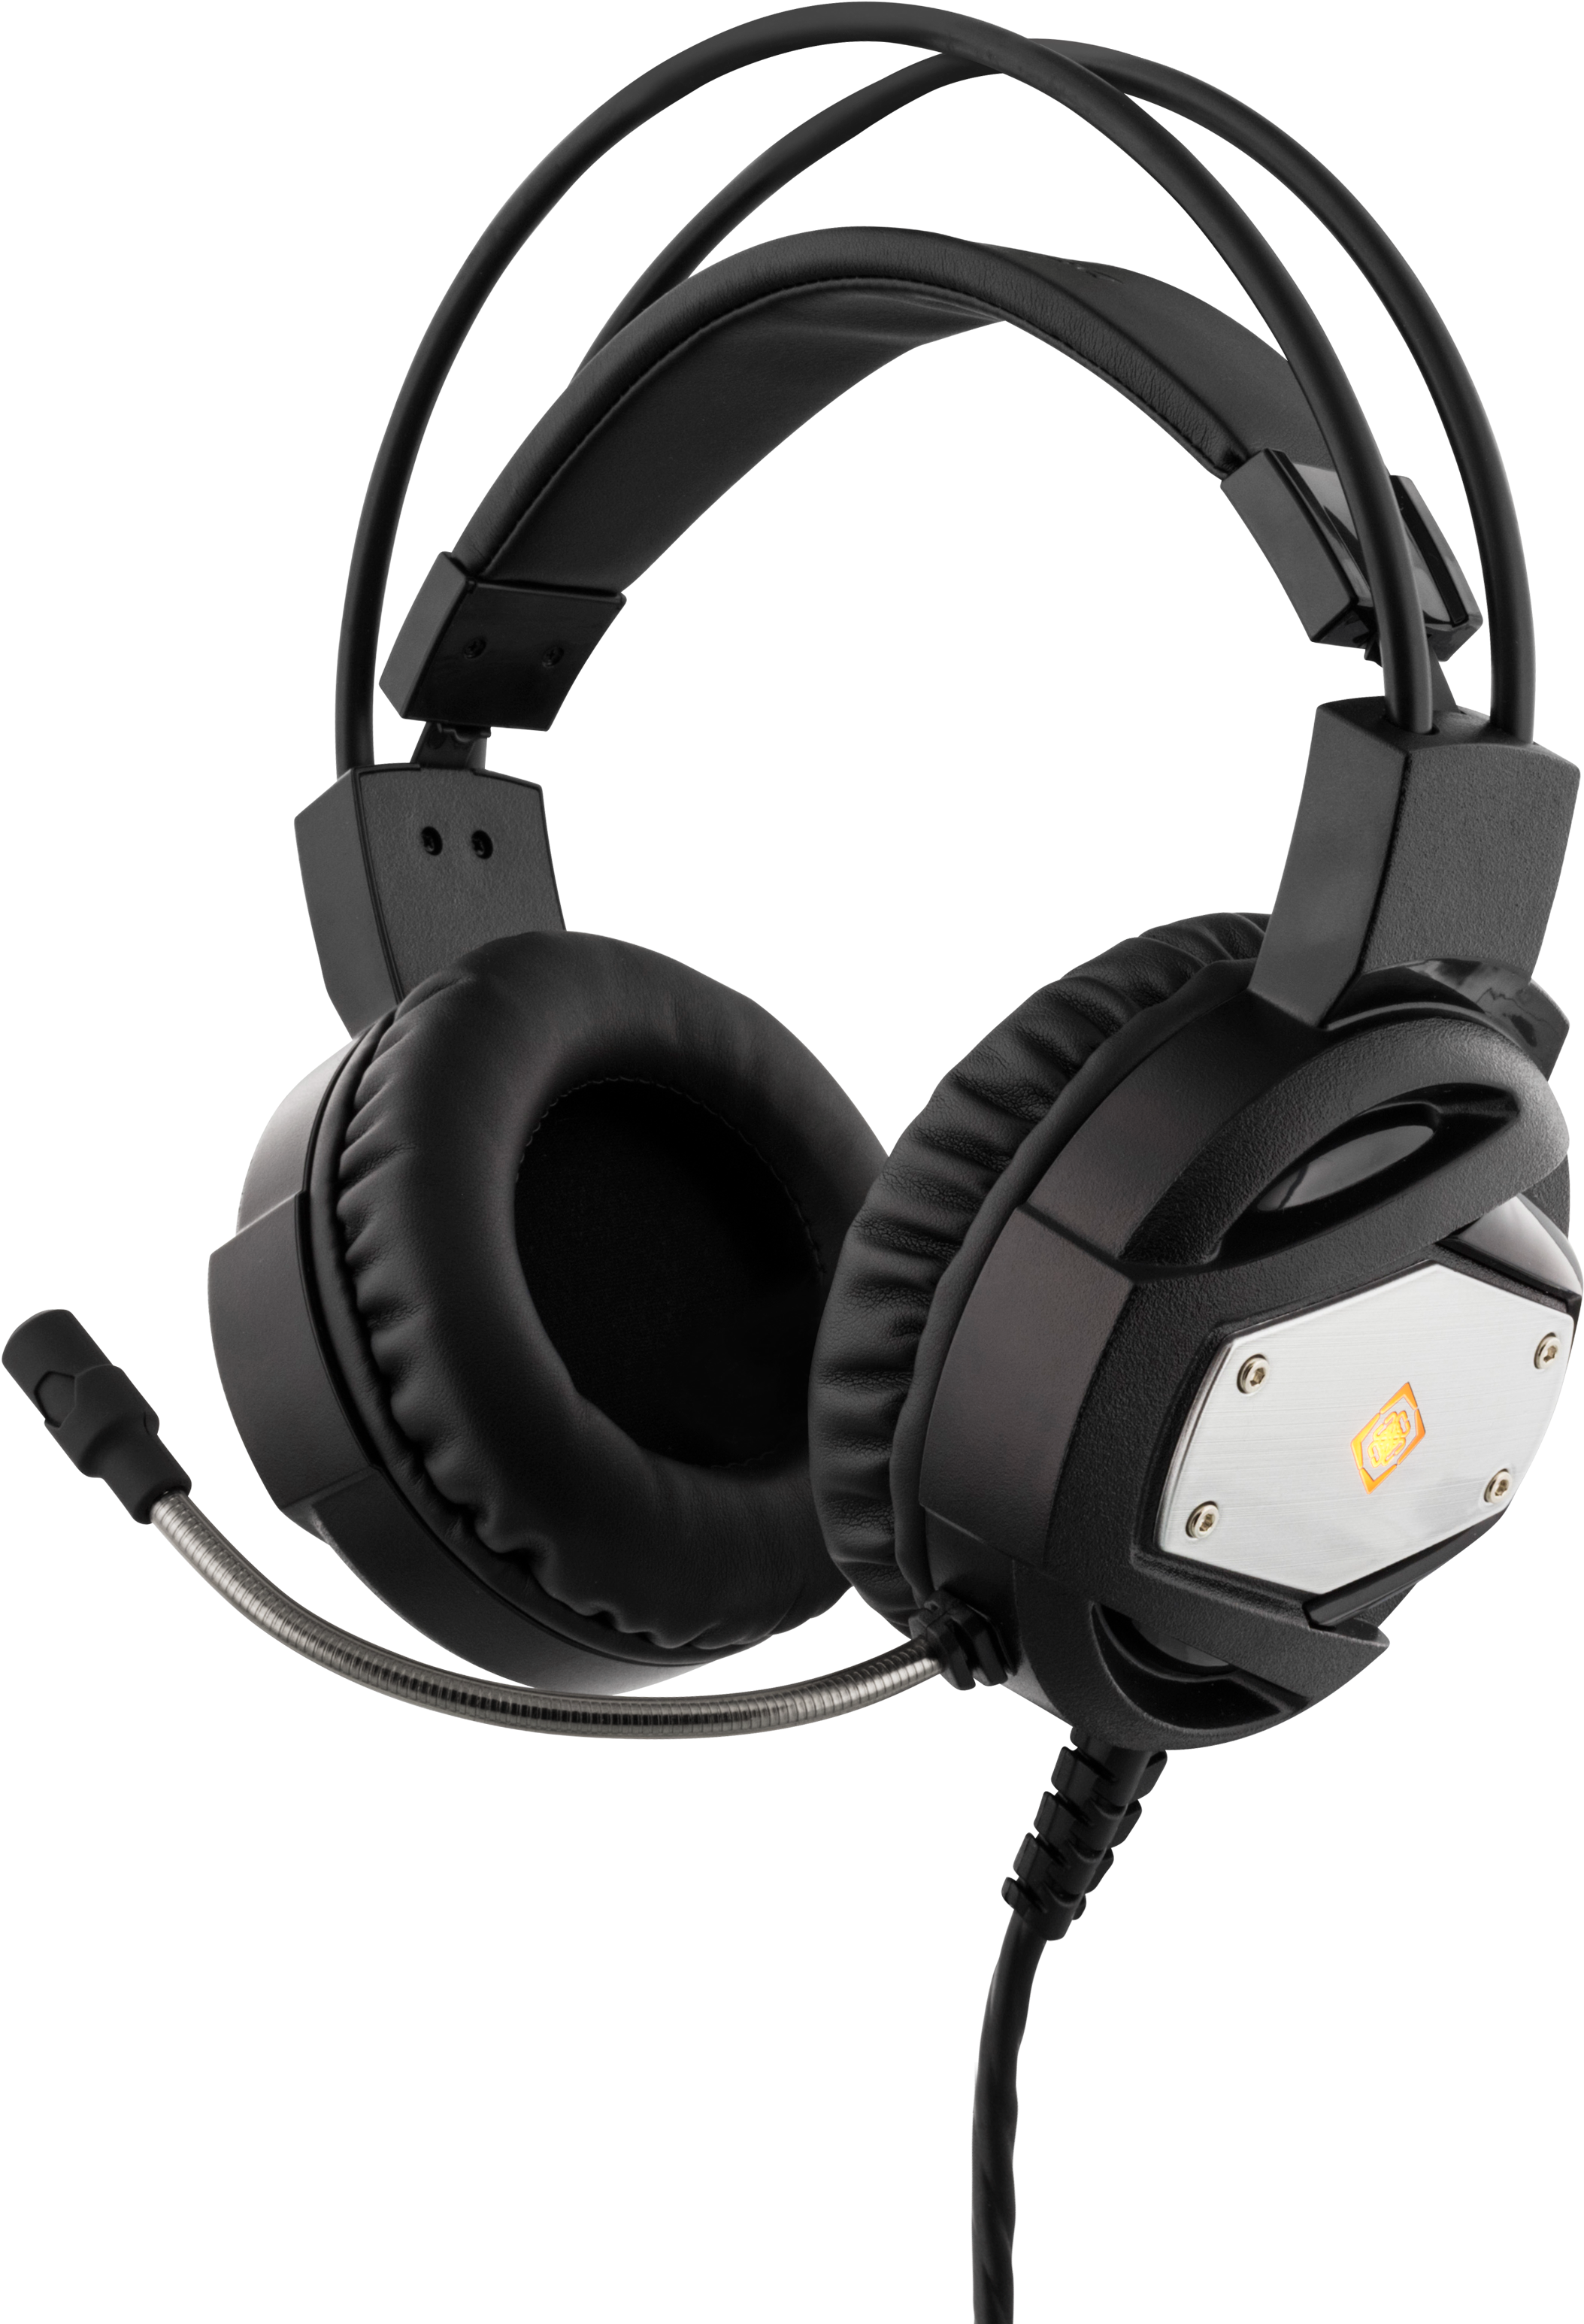 Professional Gaming Headset Isolated